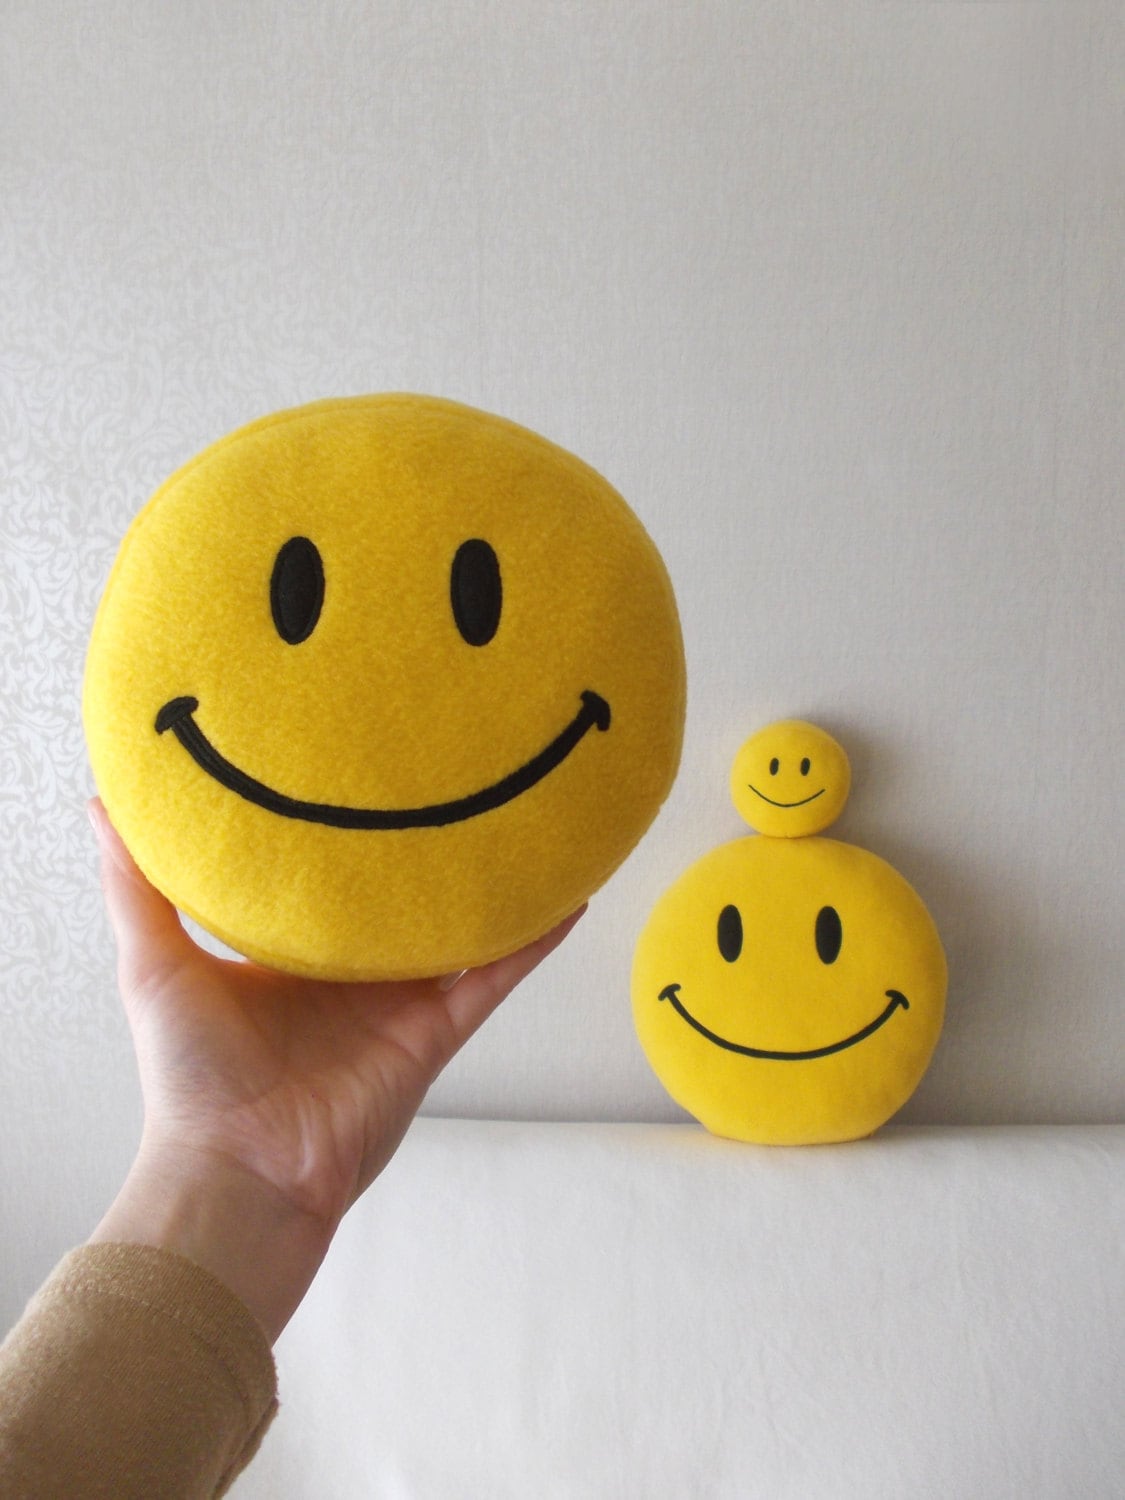  Stuffed Soft toy Small toy Smiley face Smiley Smiley face